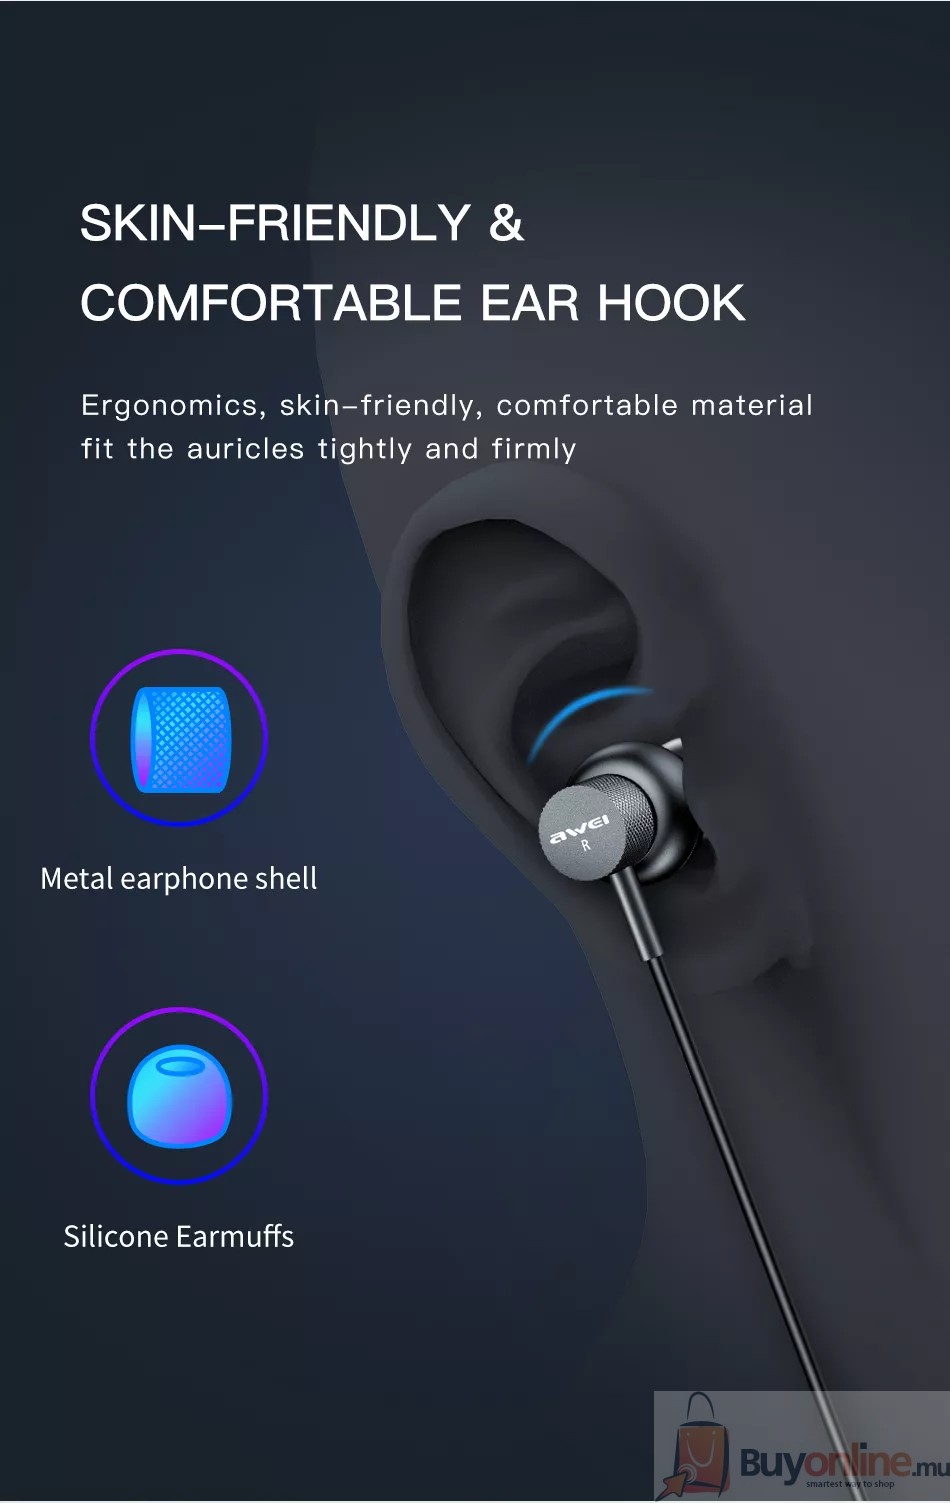 image 2022 06 11 195632103 - AWEI ES-180i In-ear Gaming Earphones 3.5mm Plug With Microphone For Phone ,Computer, Video Game Stereo HD Clean Voice - BuyOnline.mu - AWEI ES-180i,Gaming Earphones